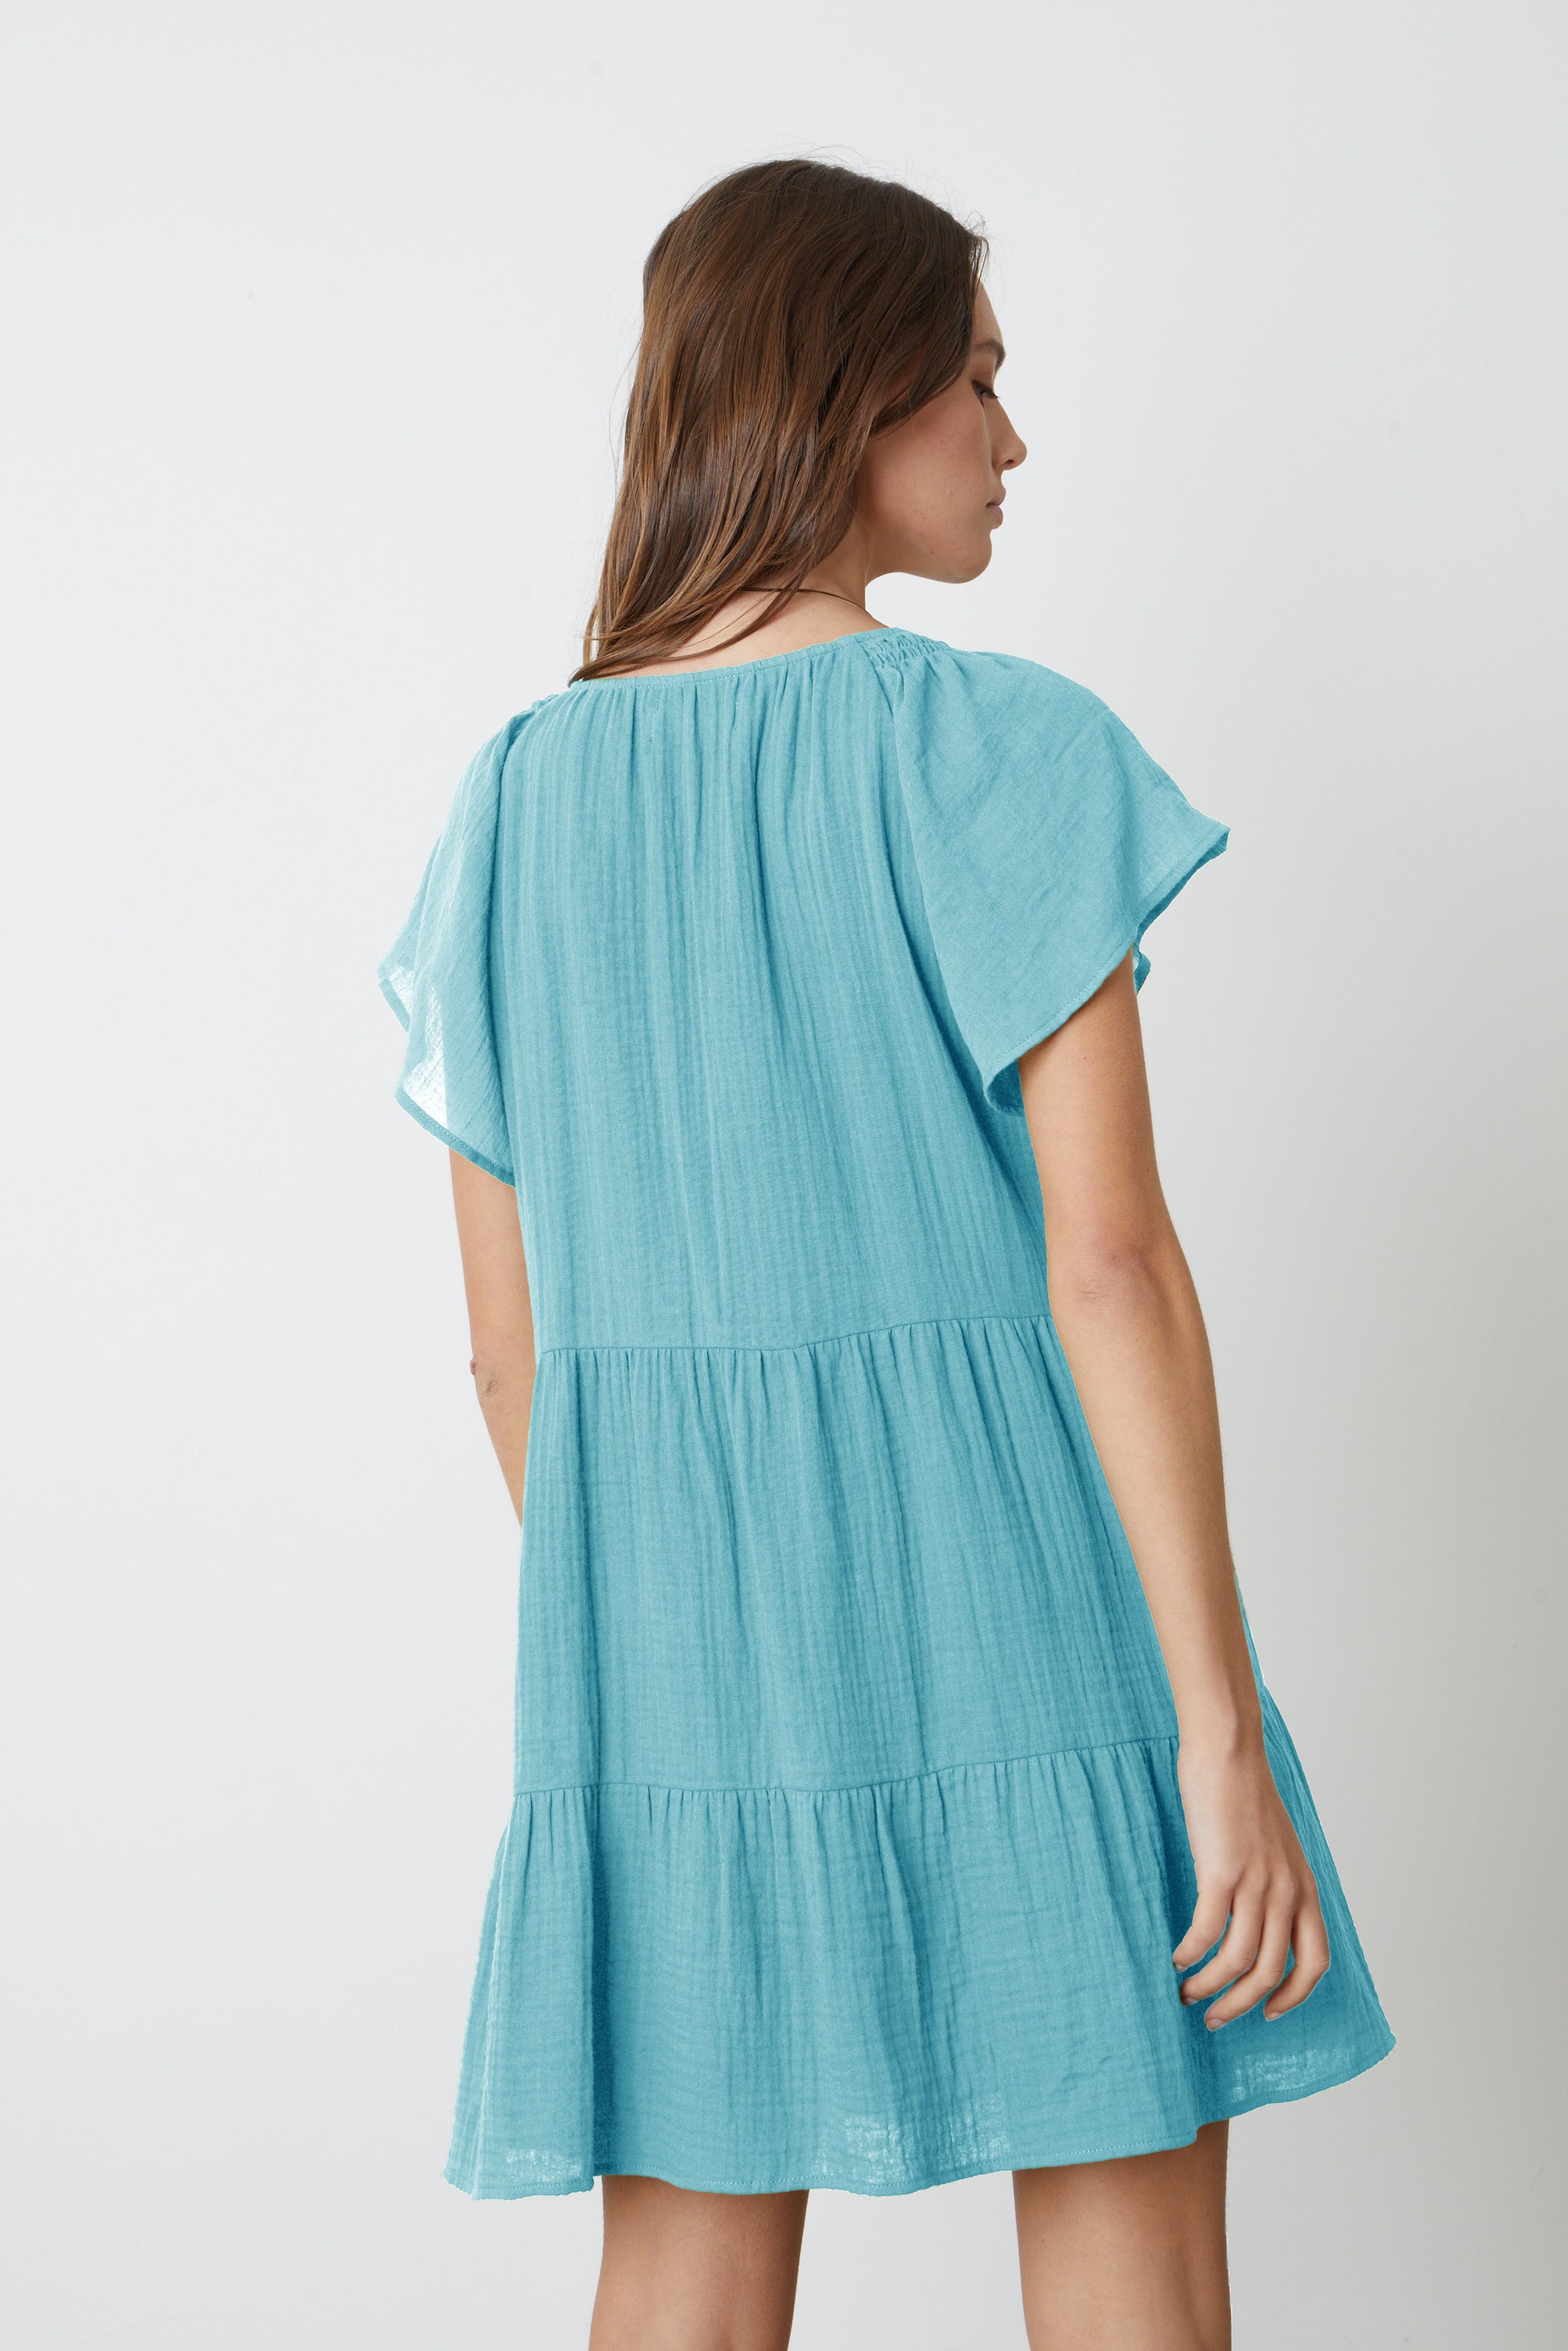   The back view of a woman wearing the Velvet by Graham & Spencer ELEANOR COTTON GAUZE TIERED DRESS. 